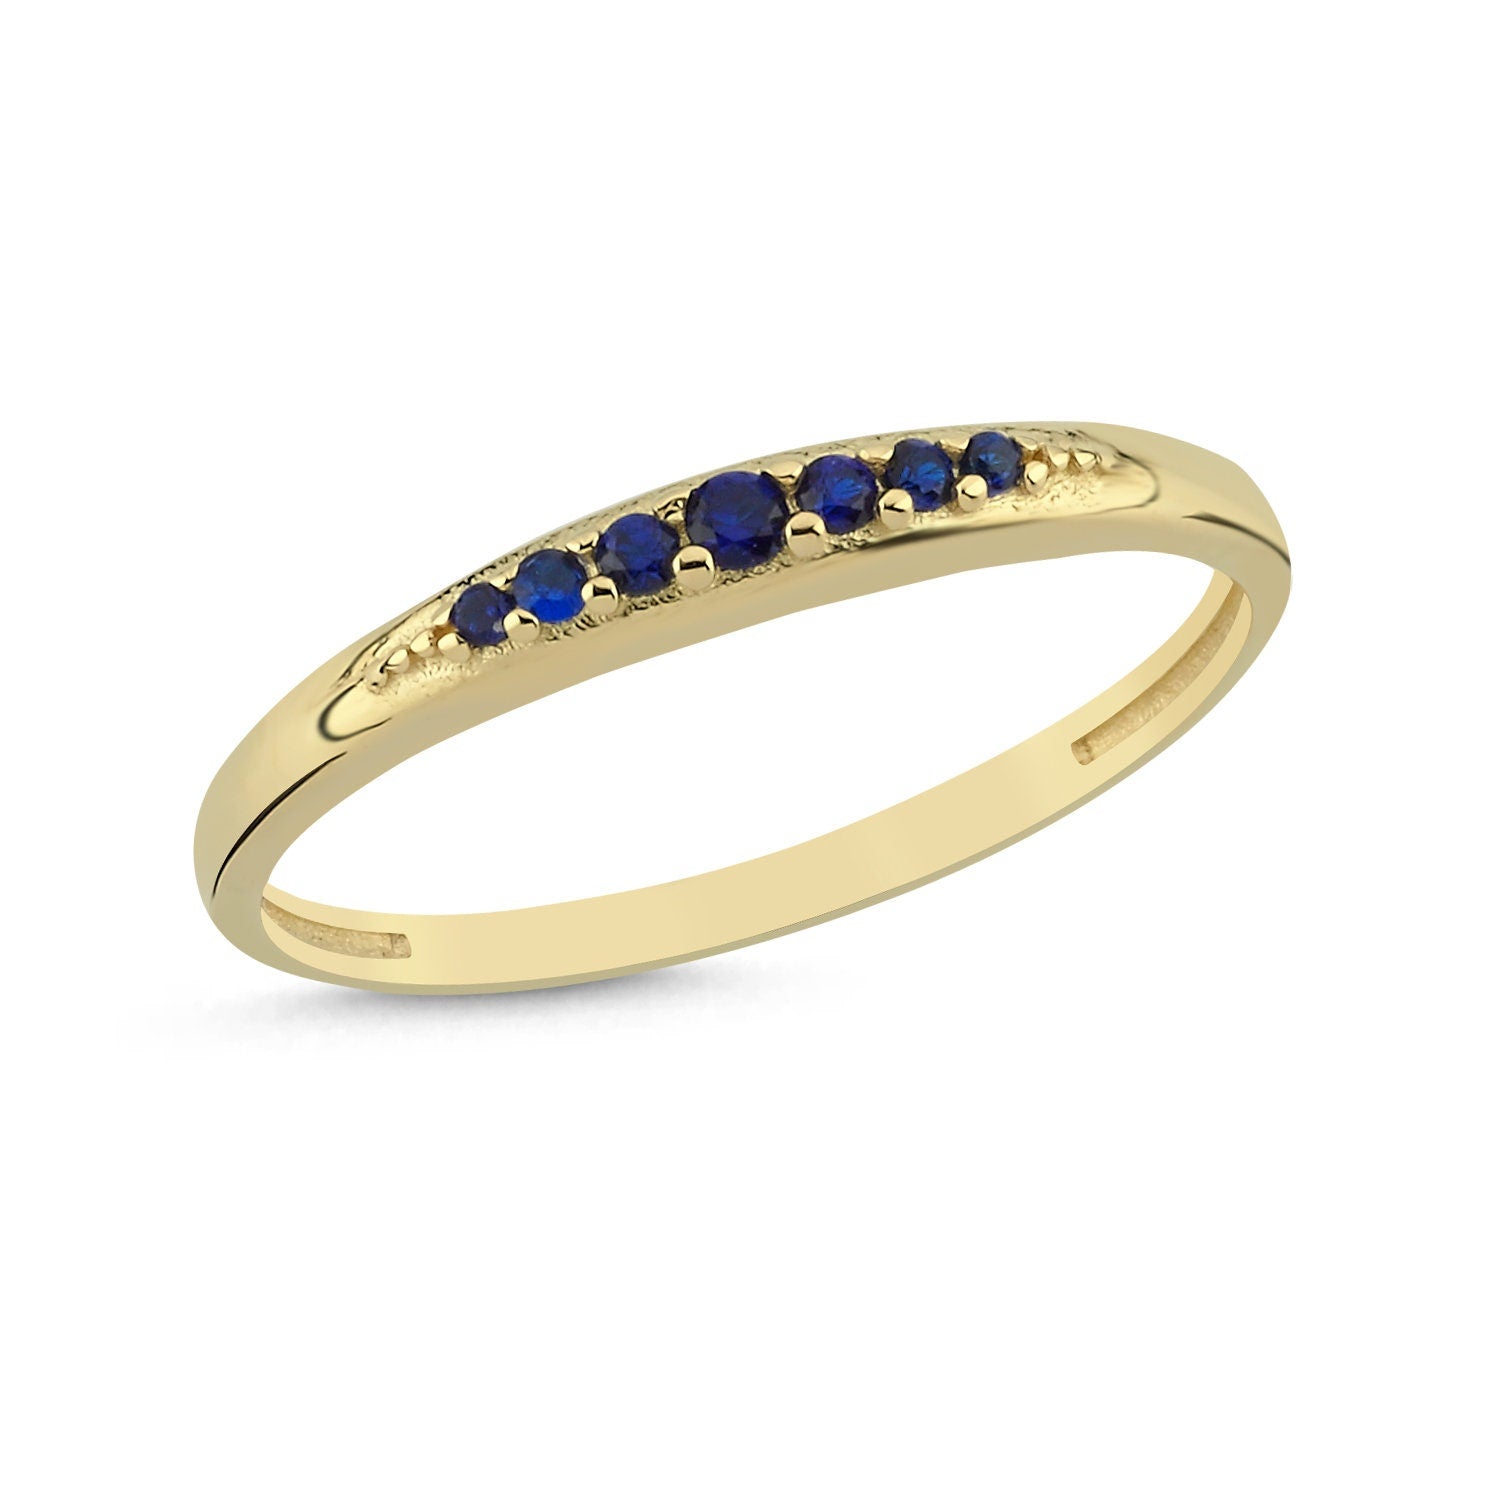 14K Gold Stackable Minimal Ring with Blue Colorful Stones Hems Jewellery 